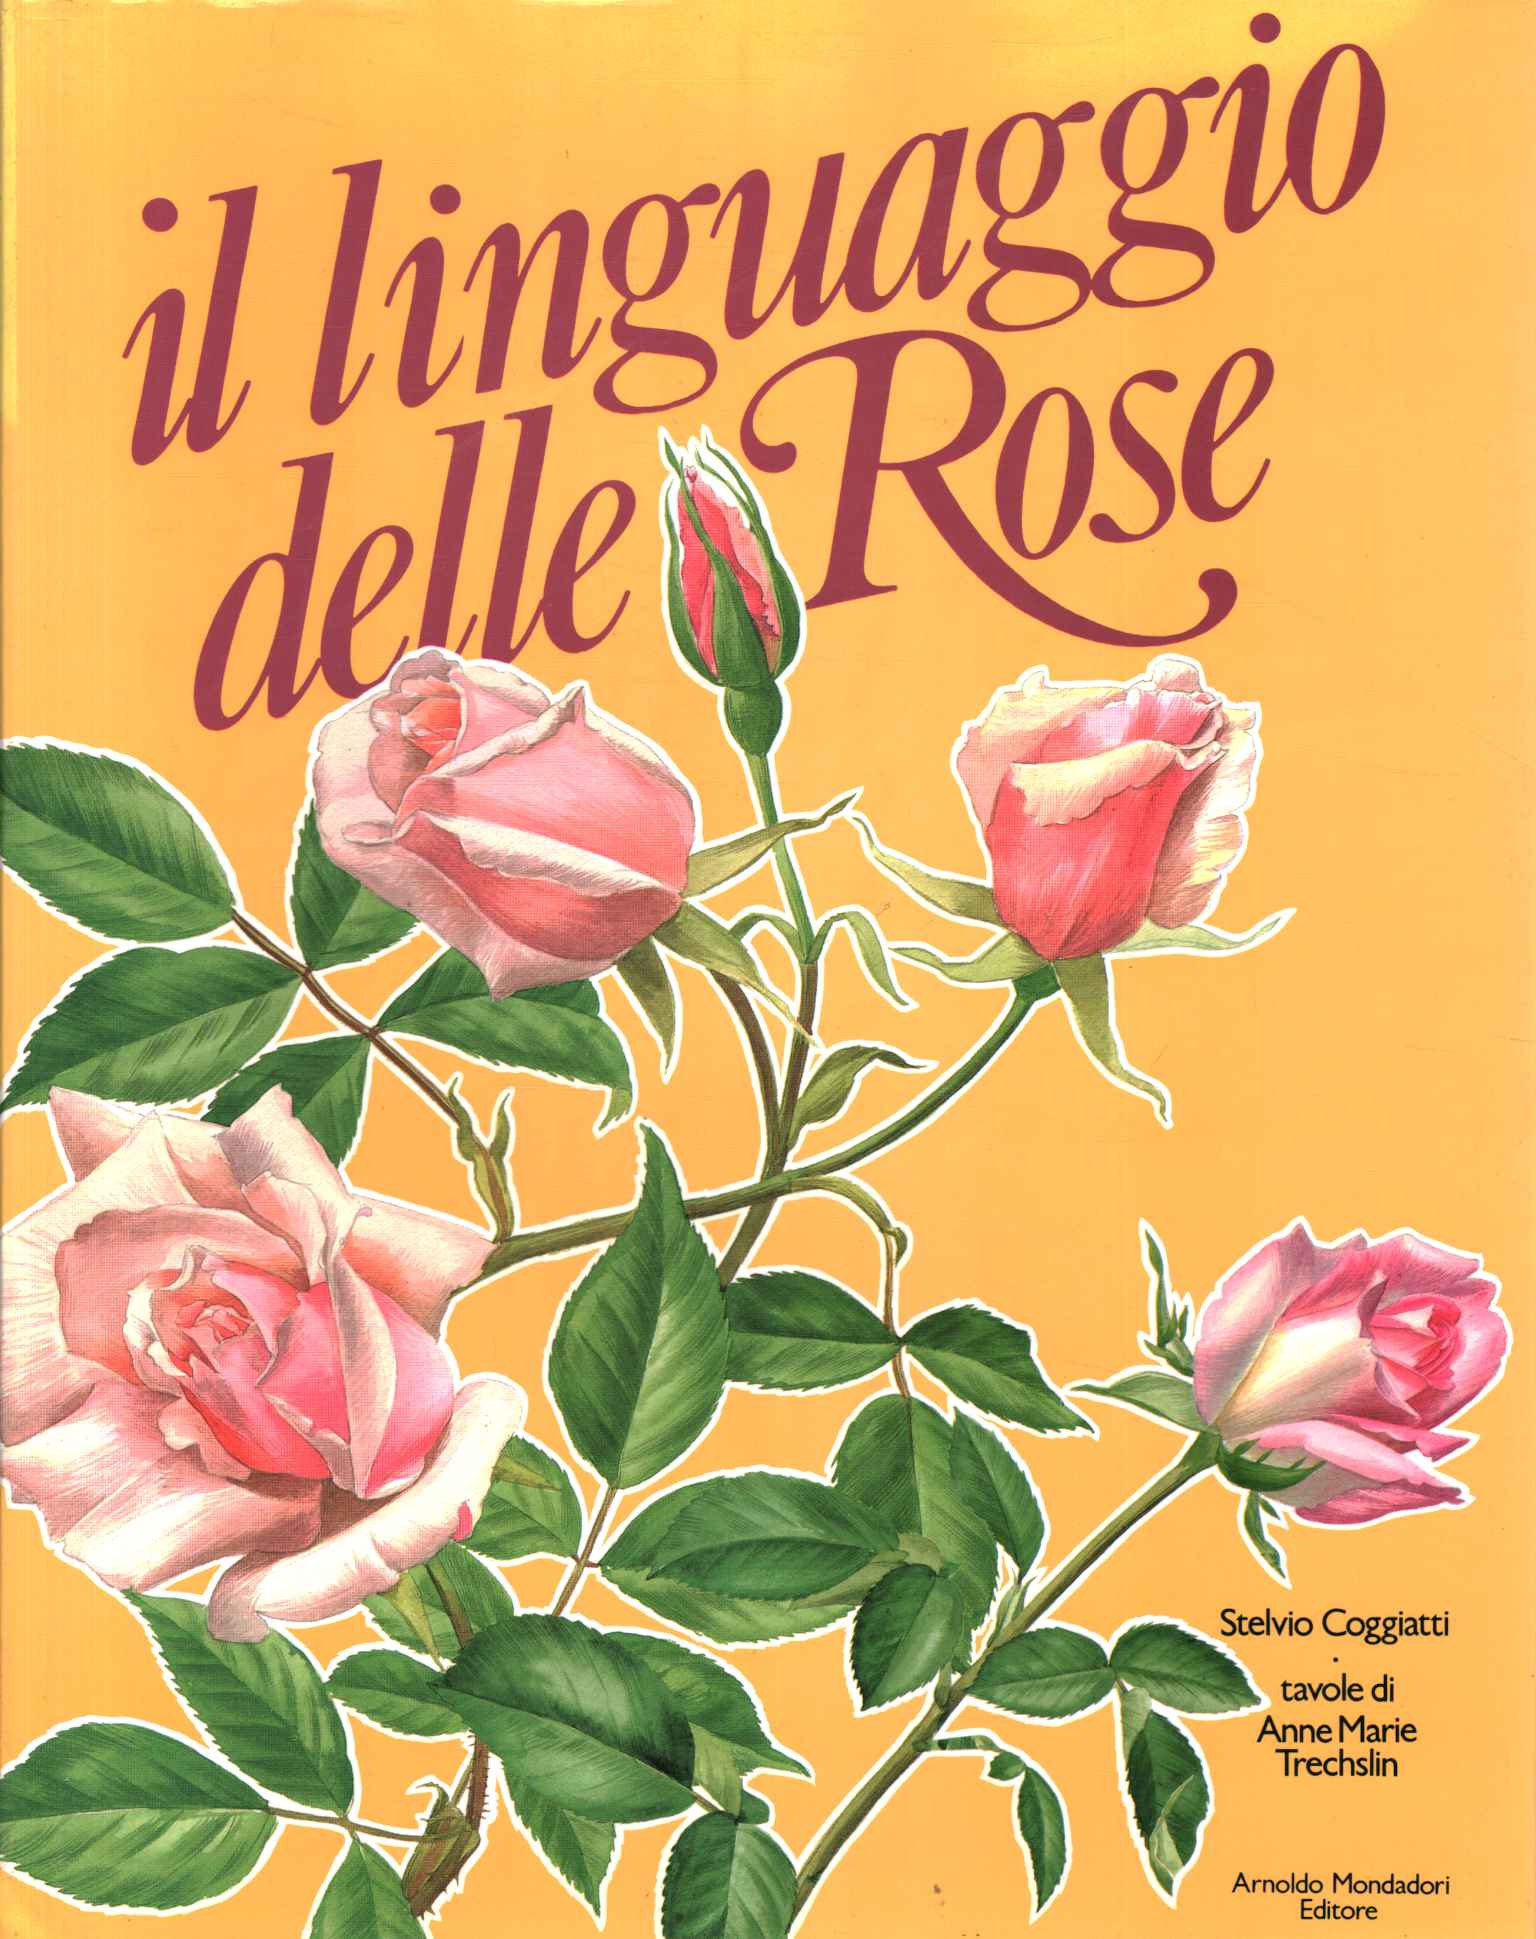 The language of roses